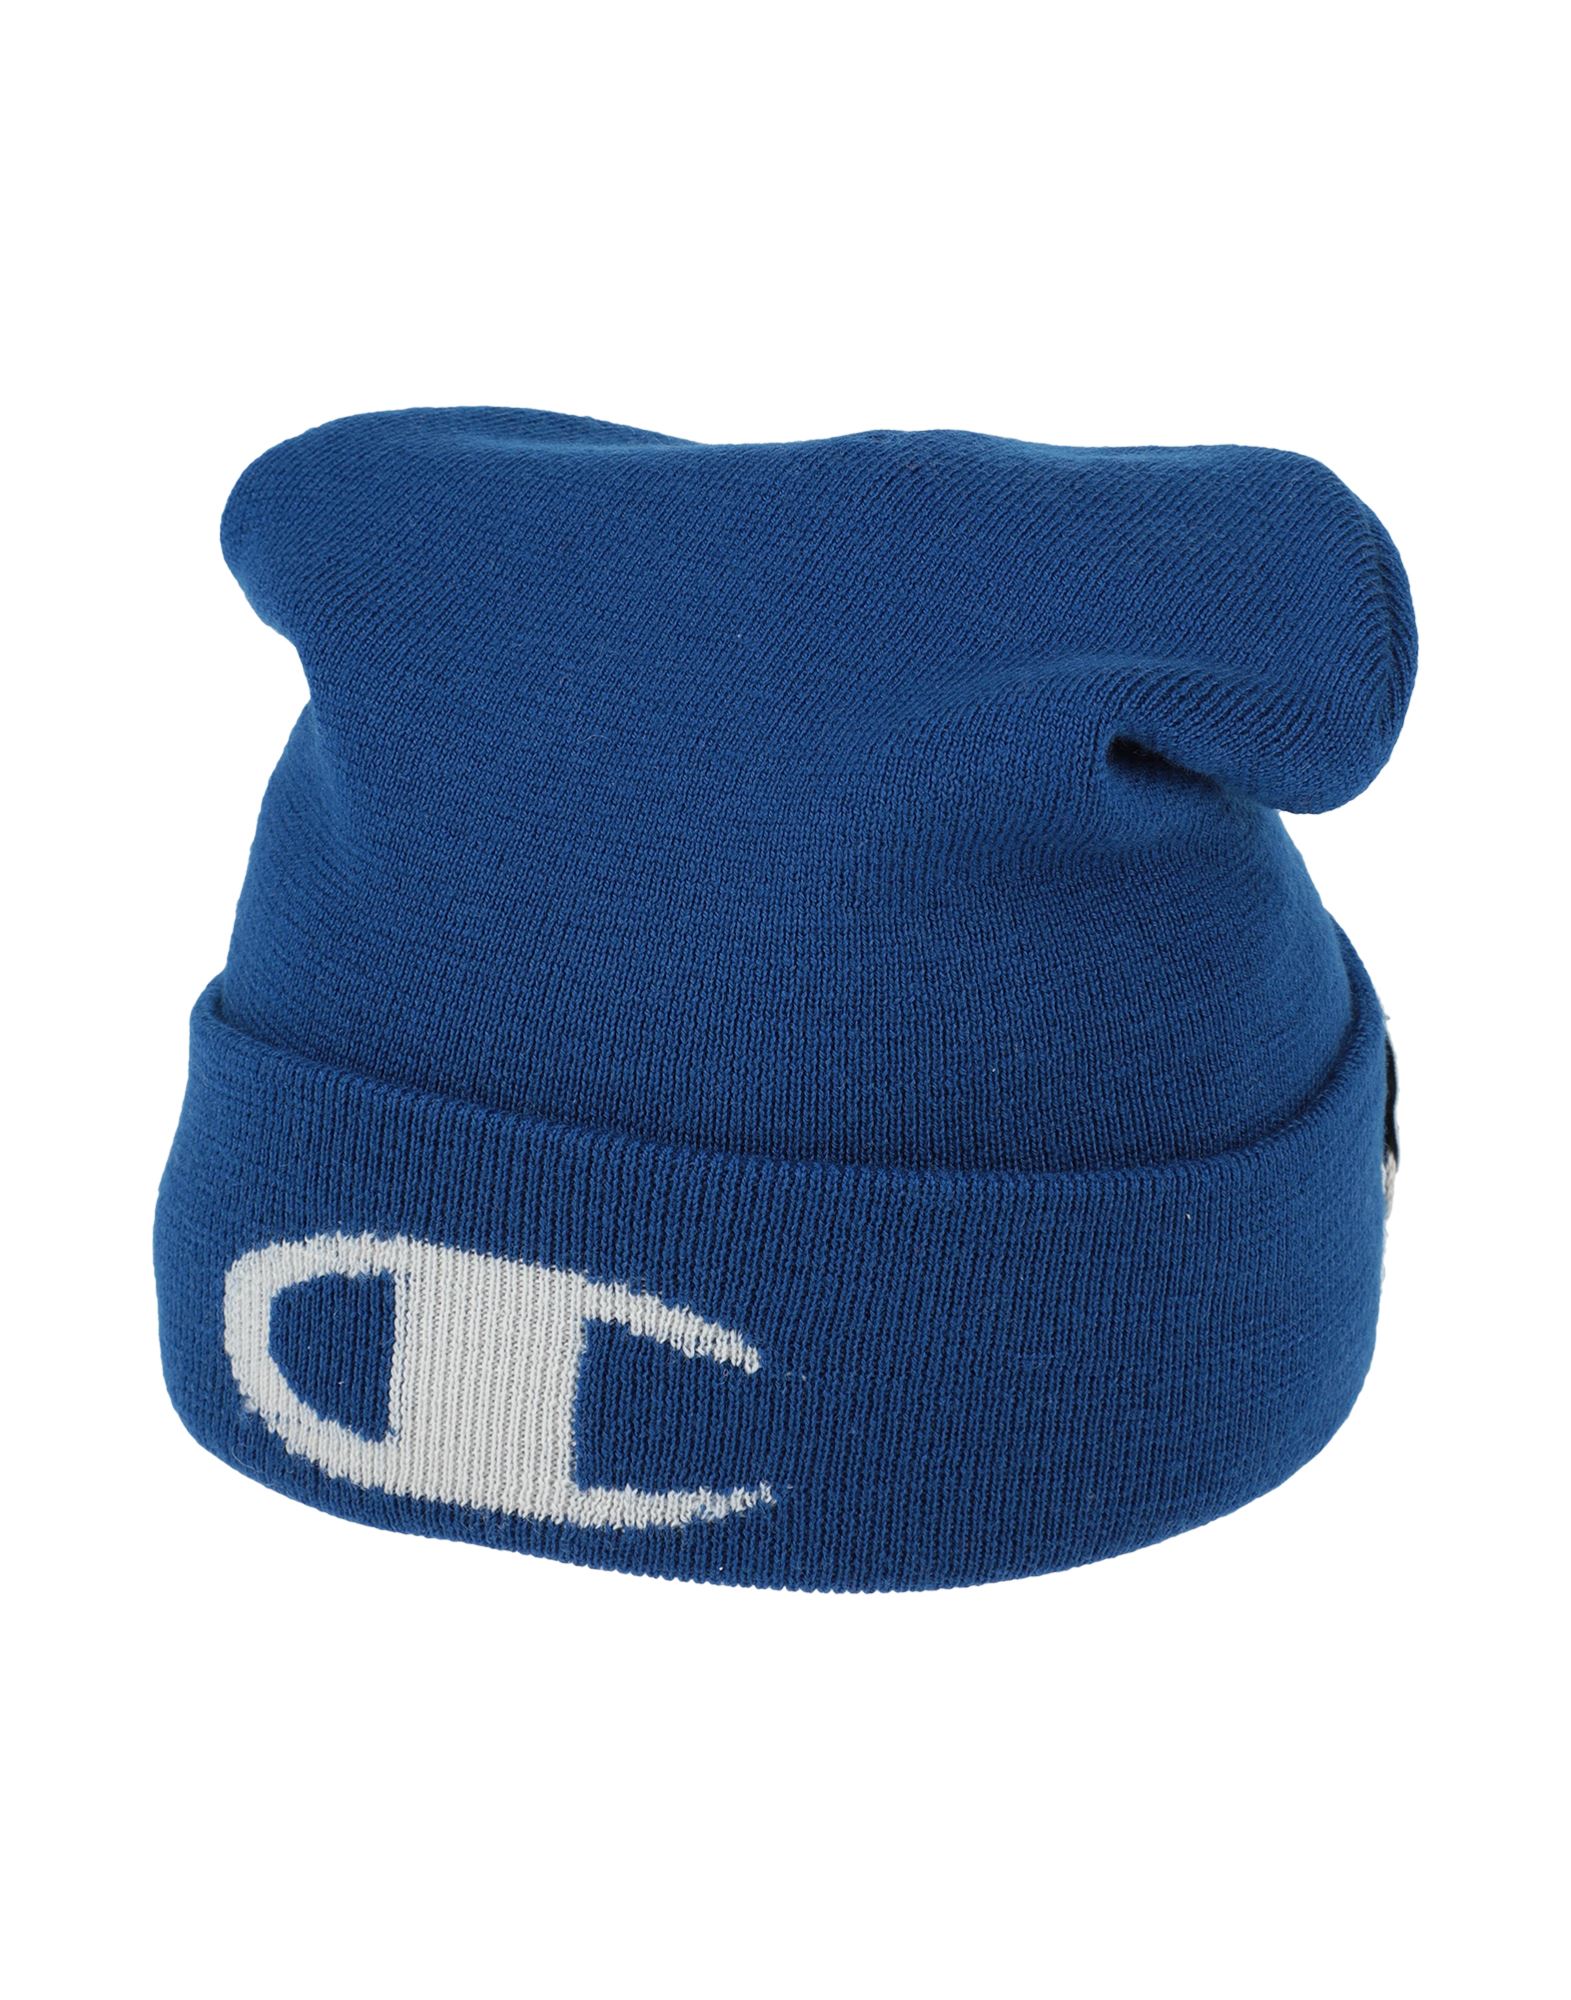 Champion Hats In Bright Blue